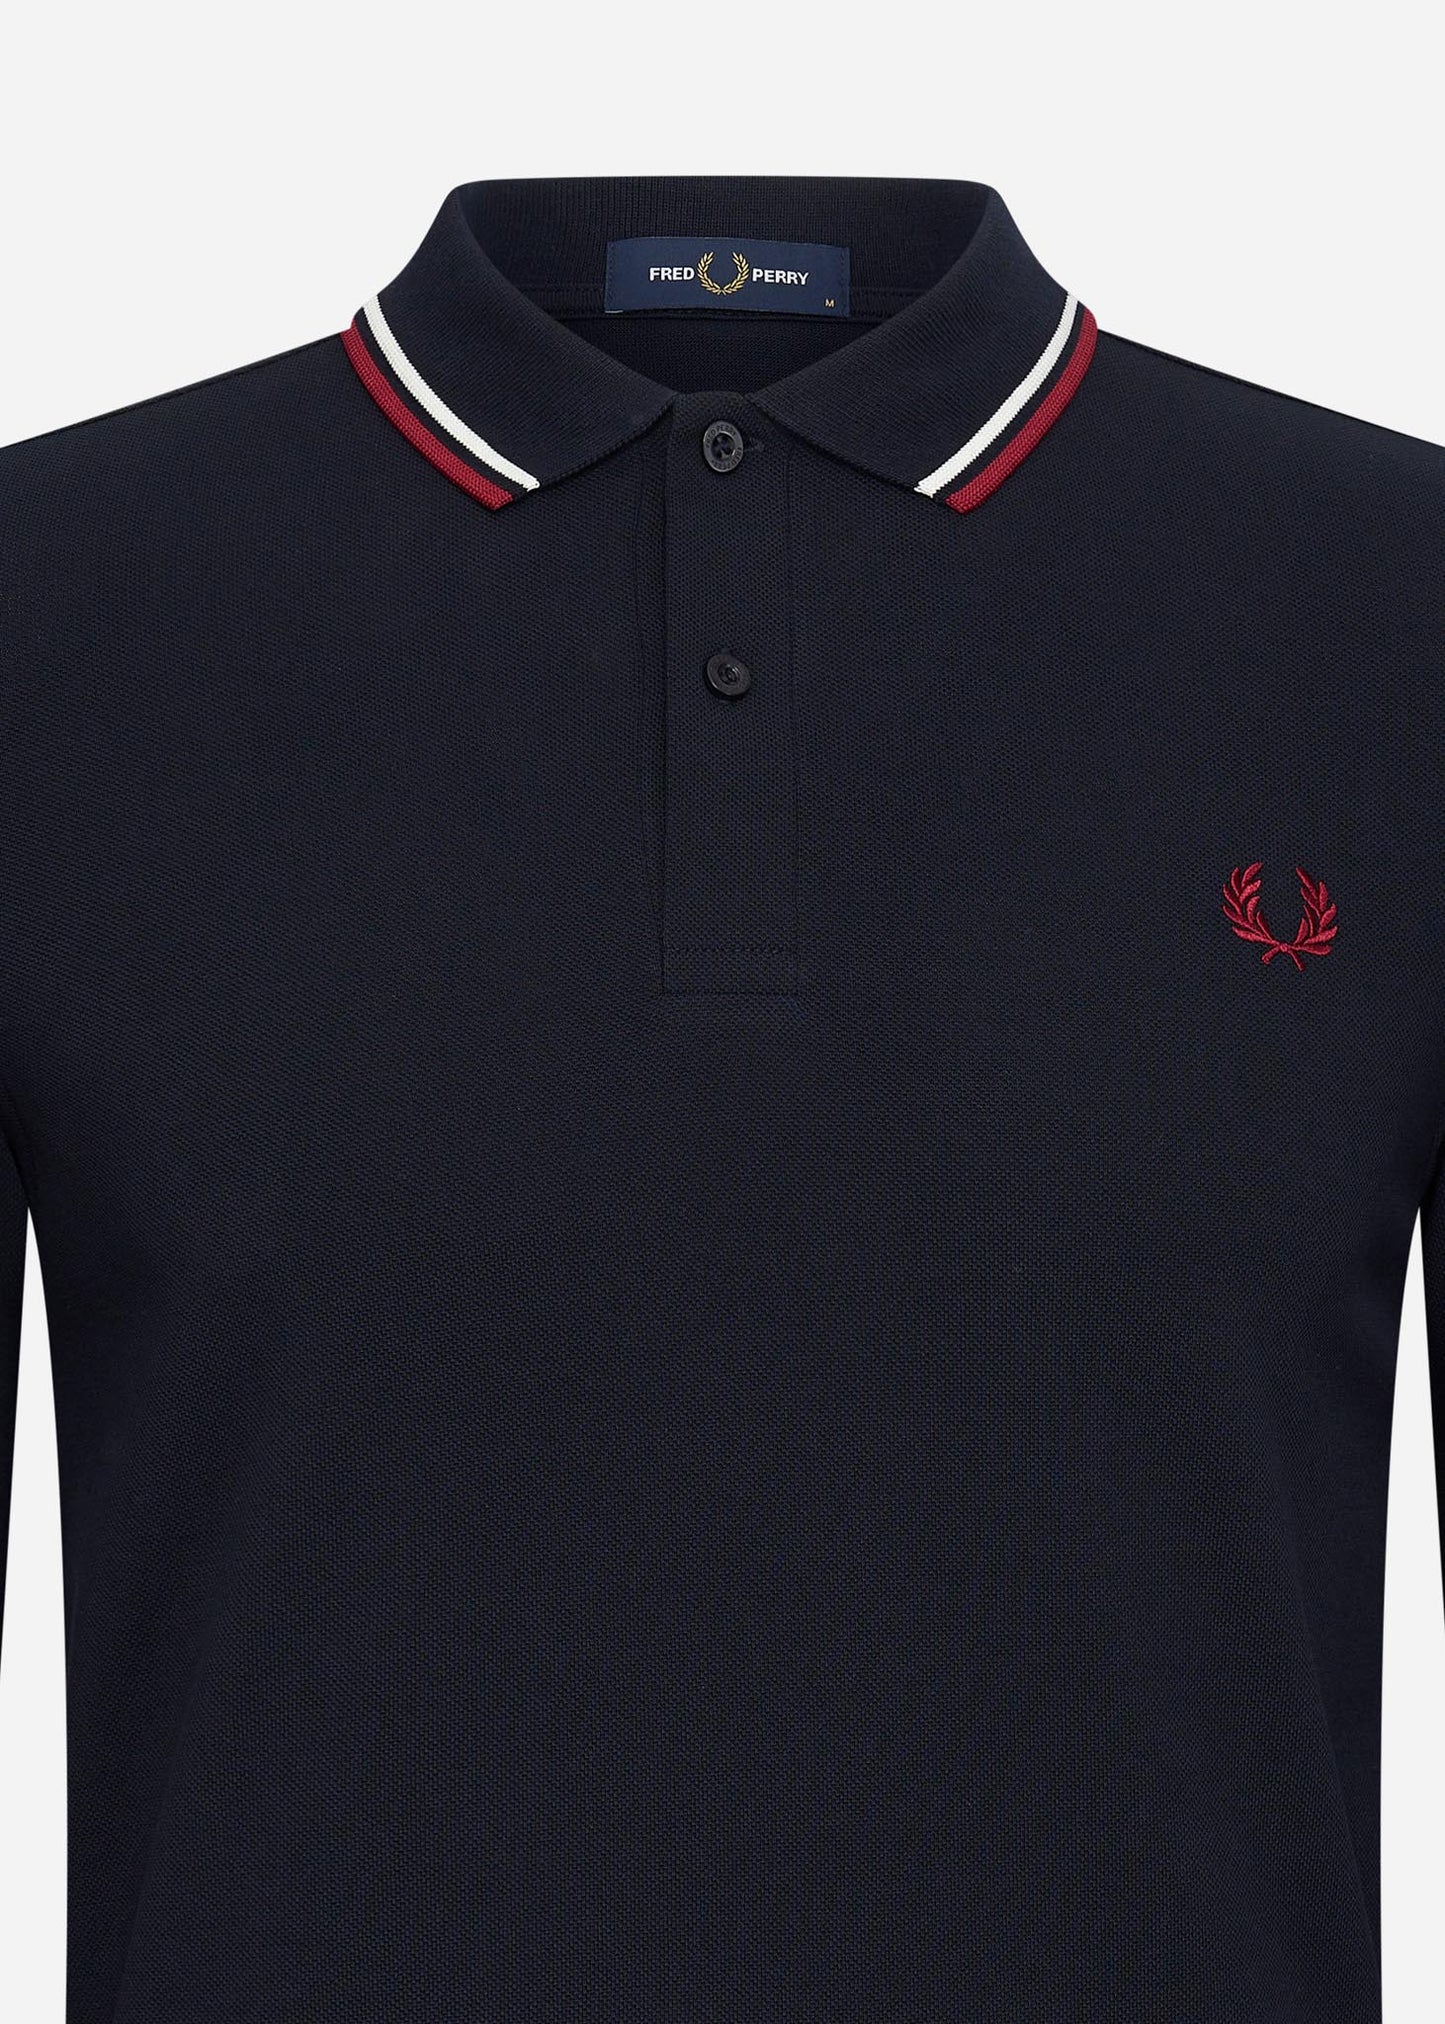 LS twin tipped shirt - navy snow white burnt red